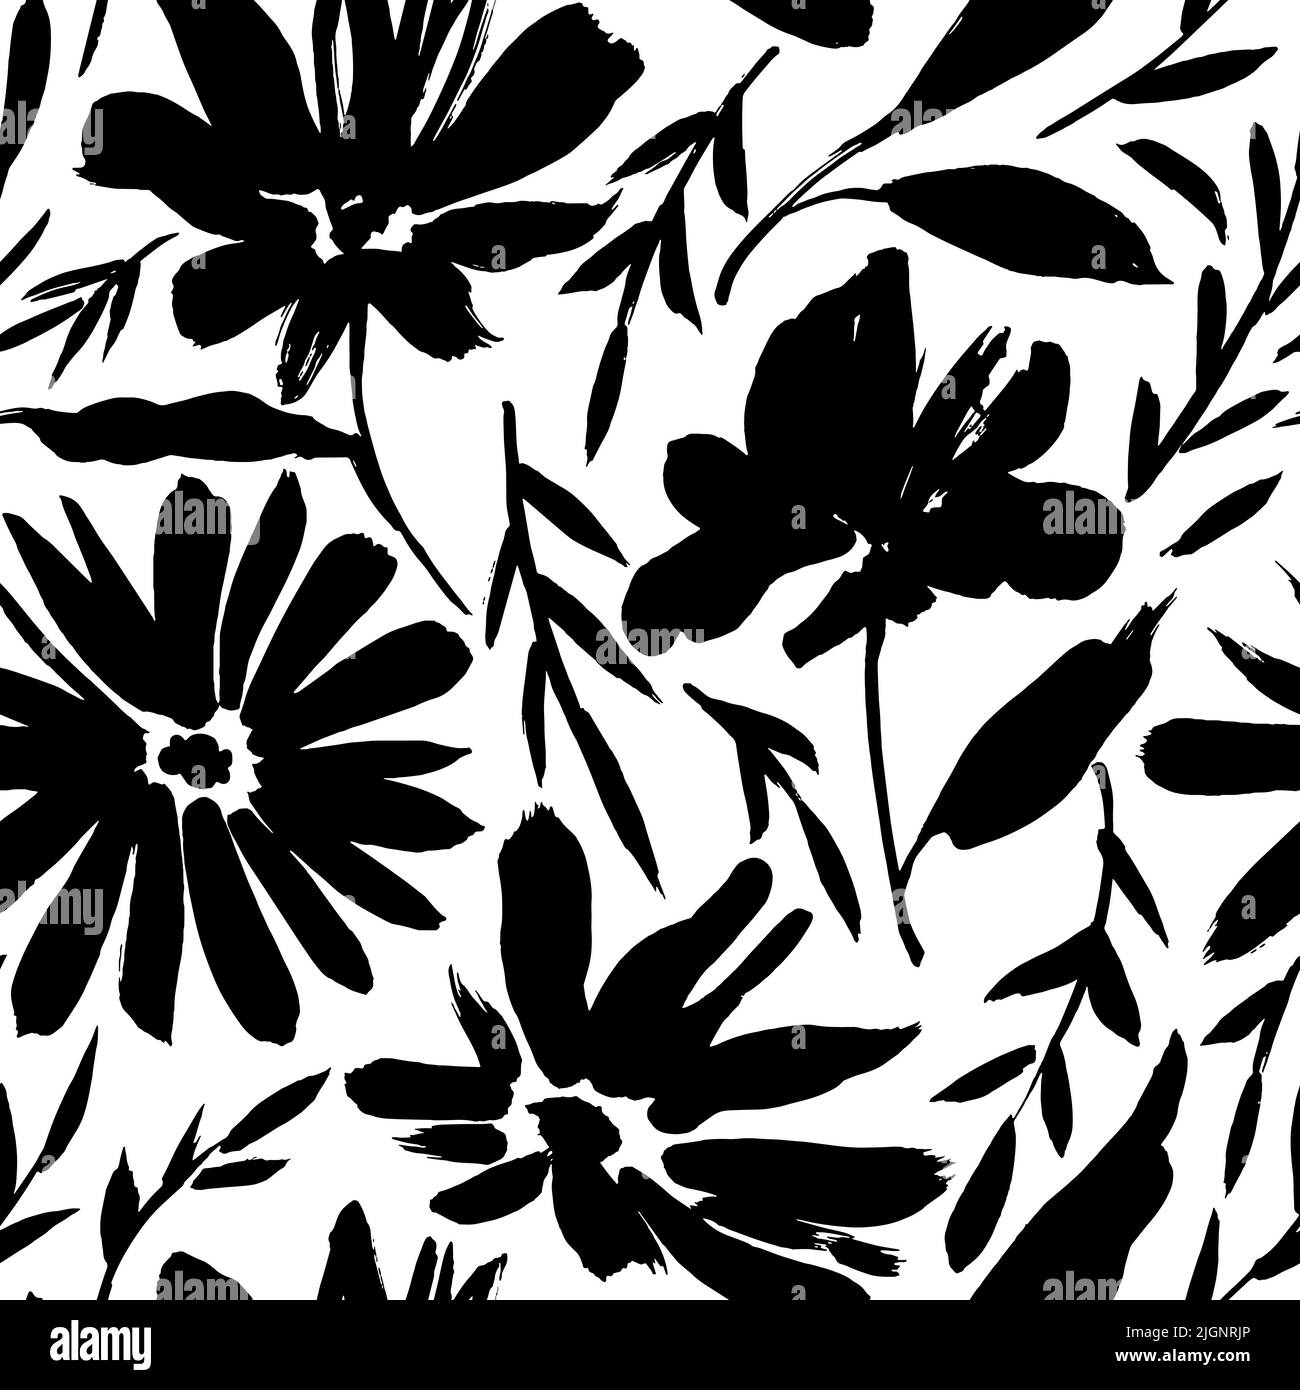 Hand drawn wild flowers vector seamless pattern Stock Vector